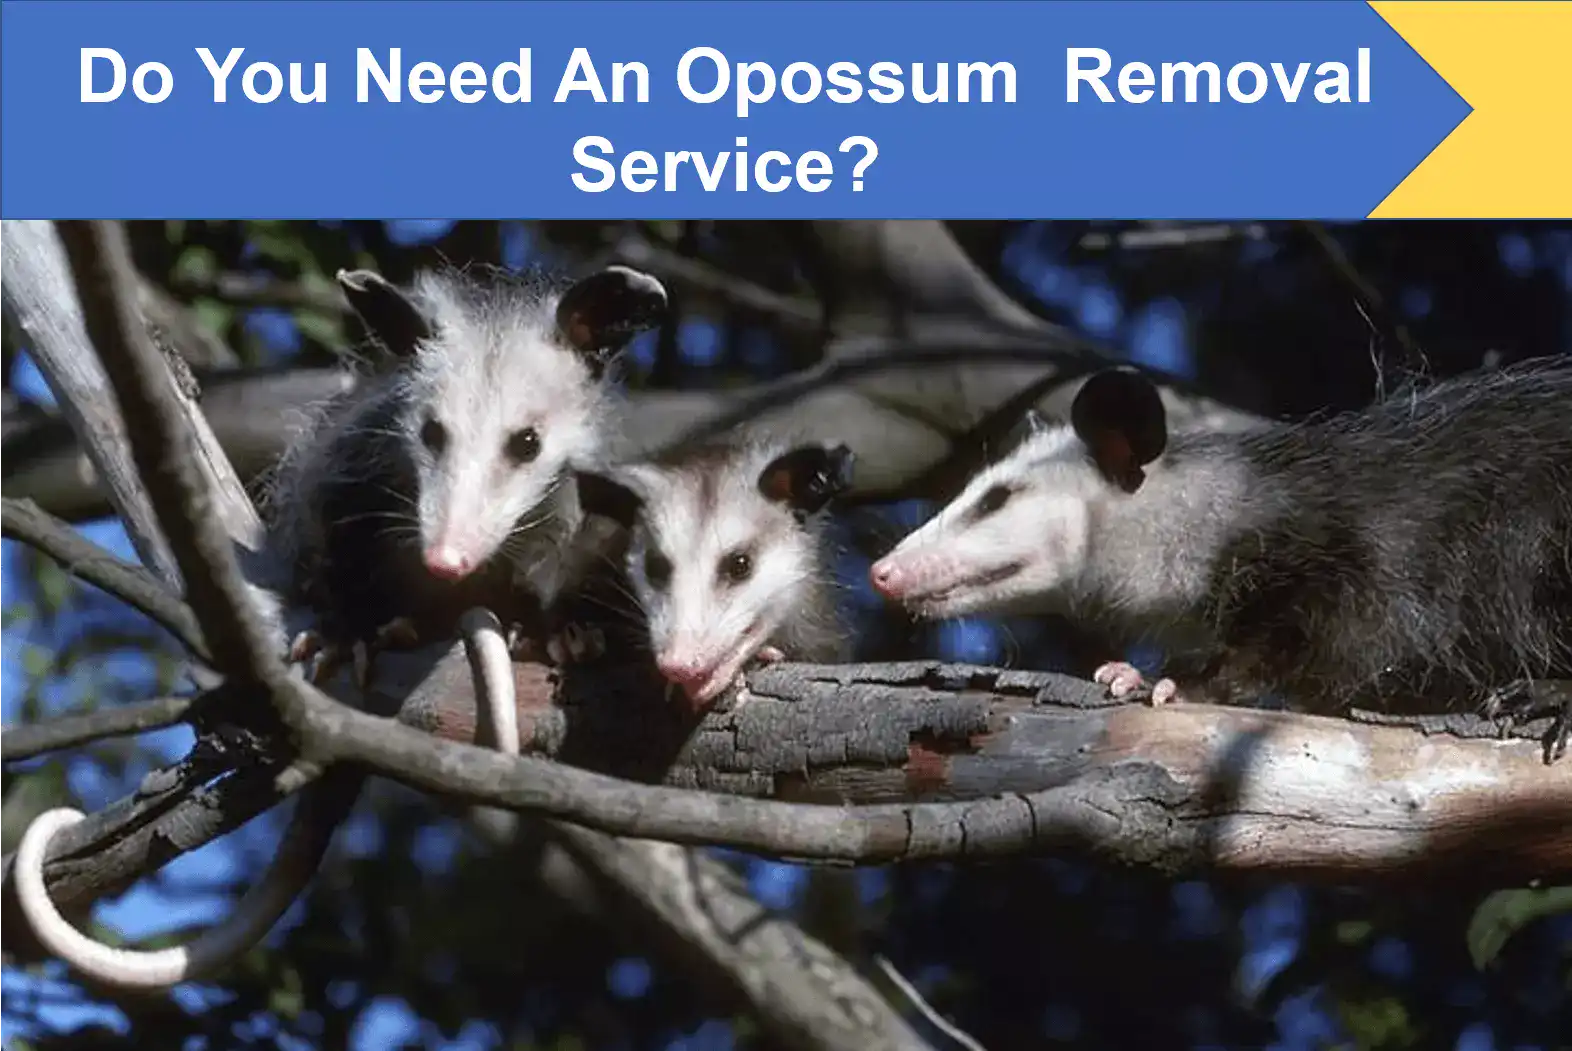 Do You Need an Opossum Removal Service?